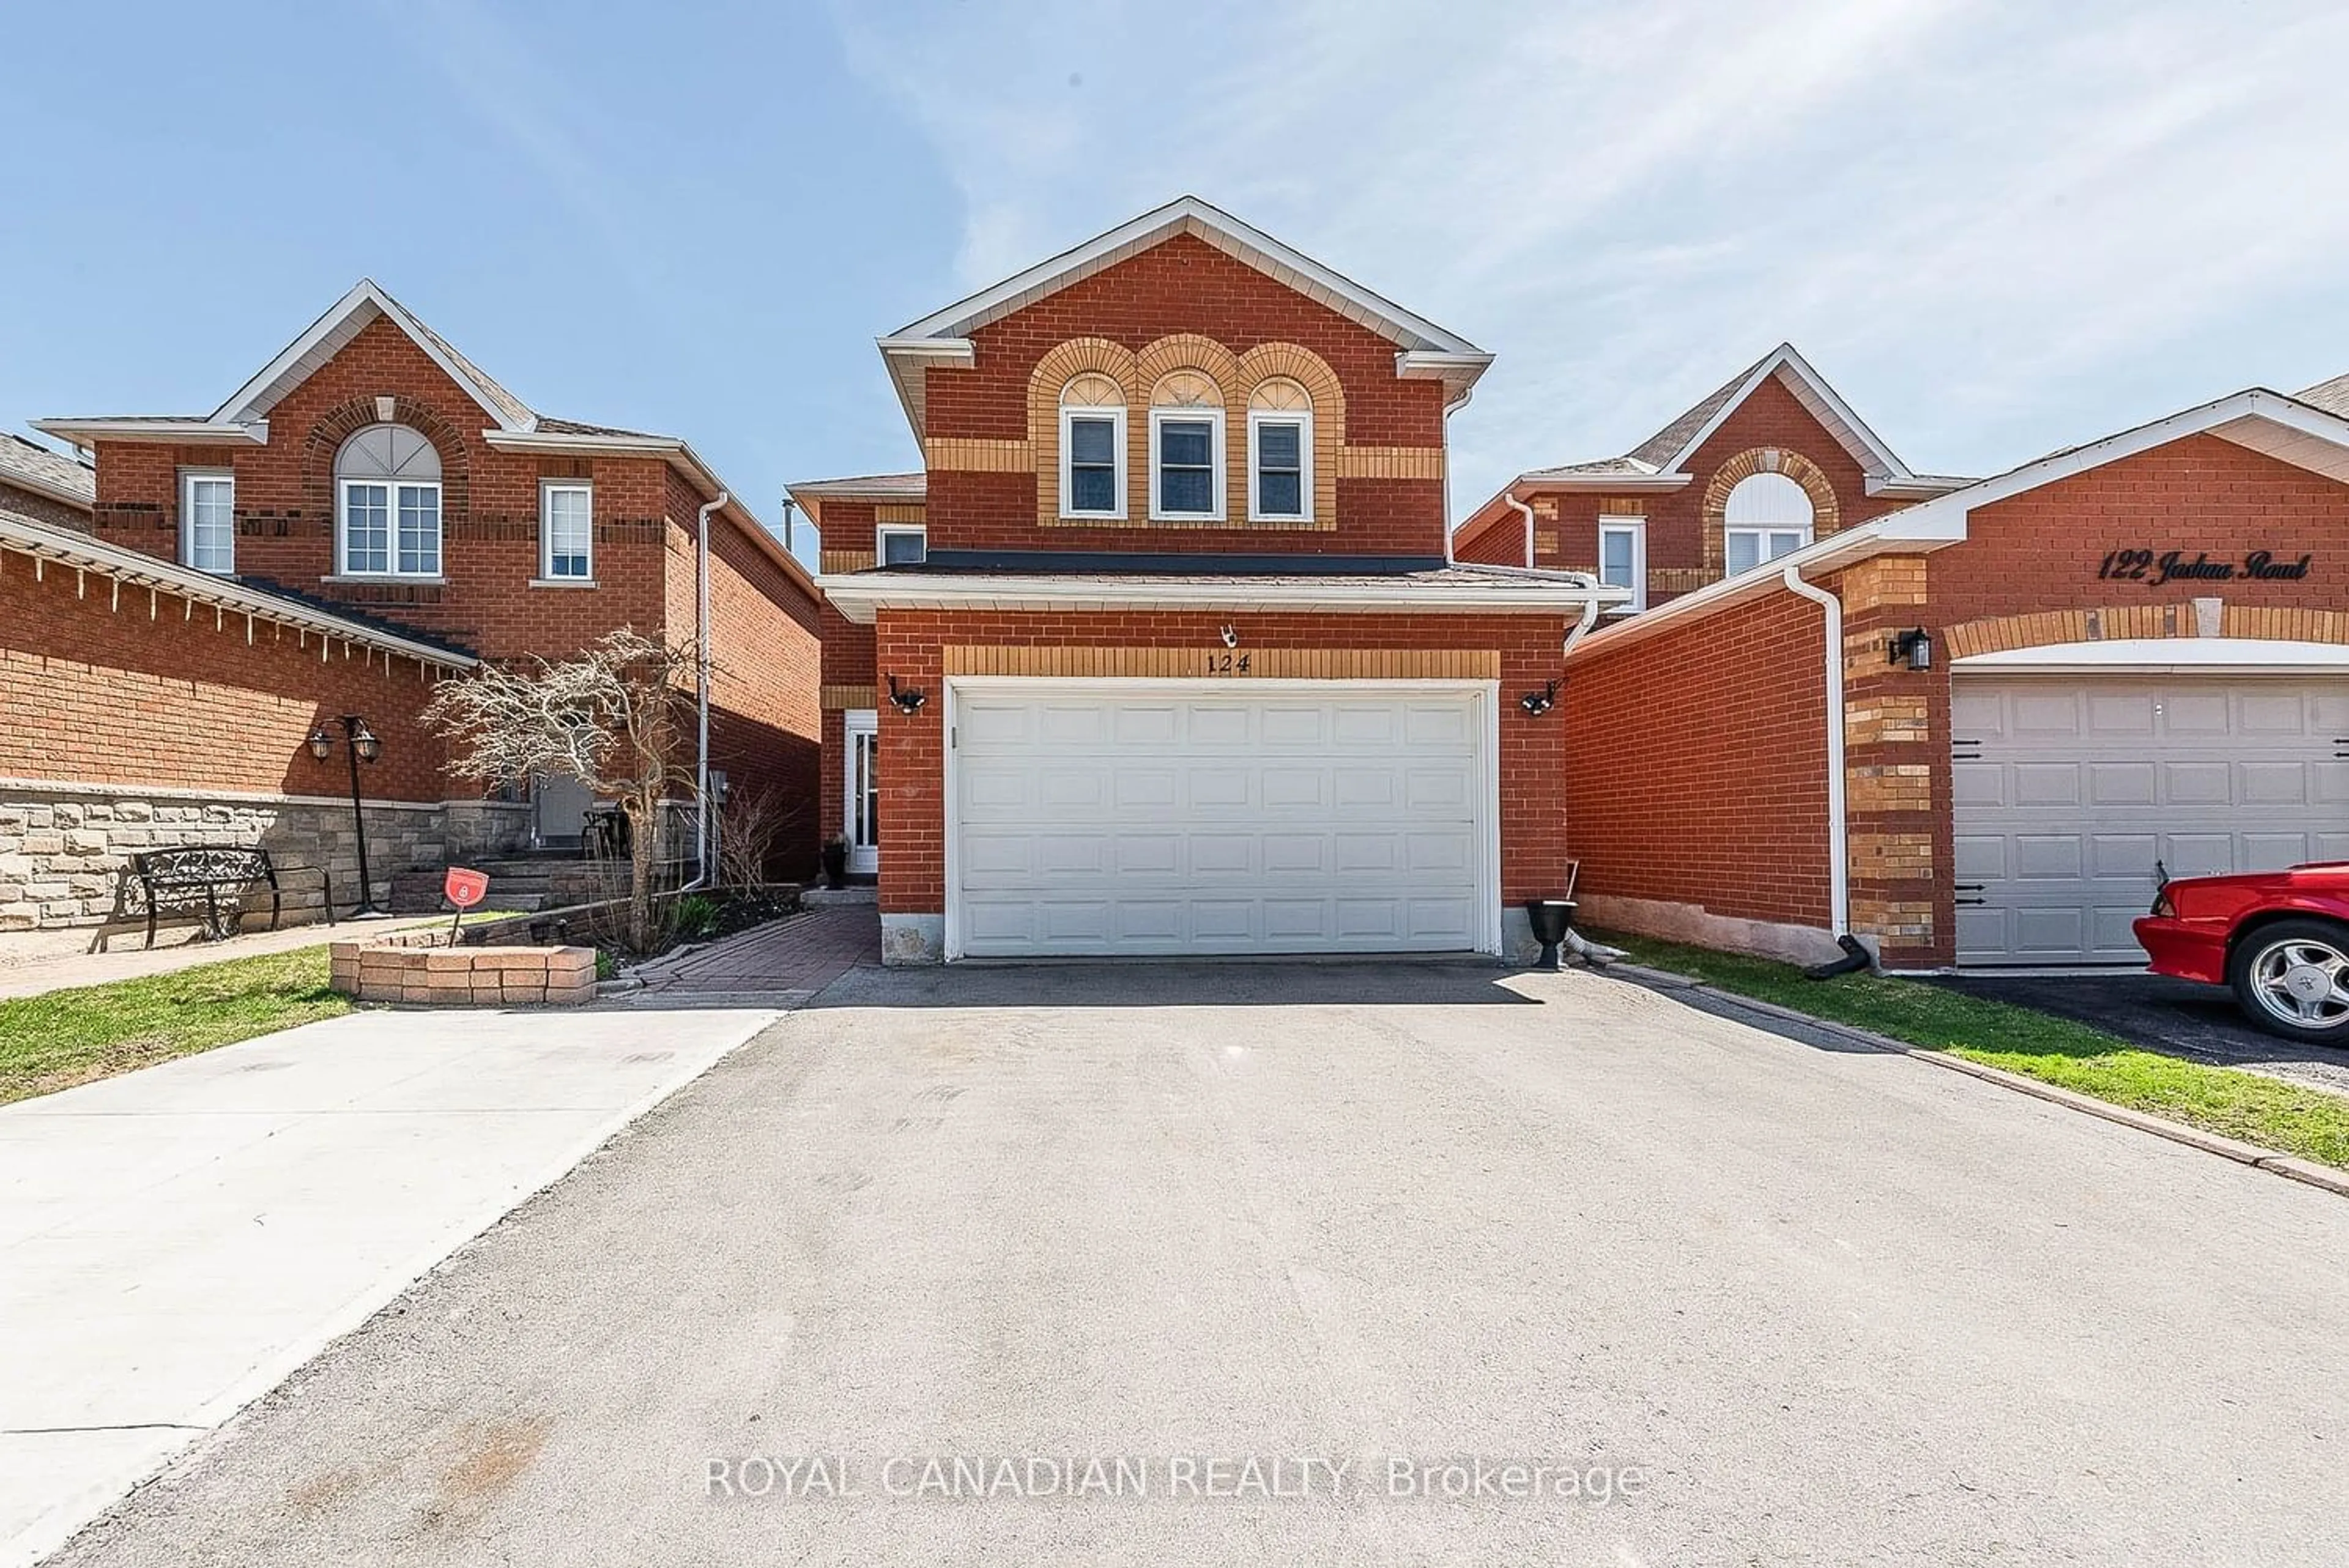 Frontside or backside of a home for 124 Joshua Rd, Orangeville Ontario L9W 4W2